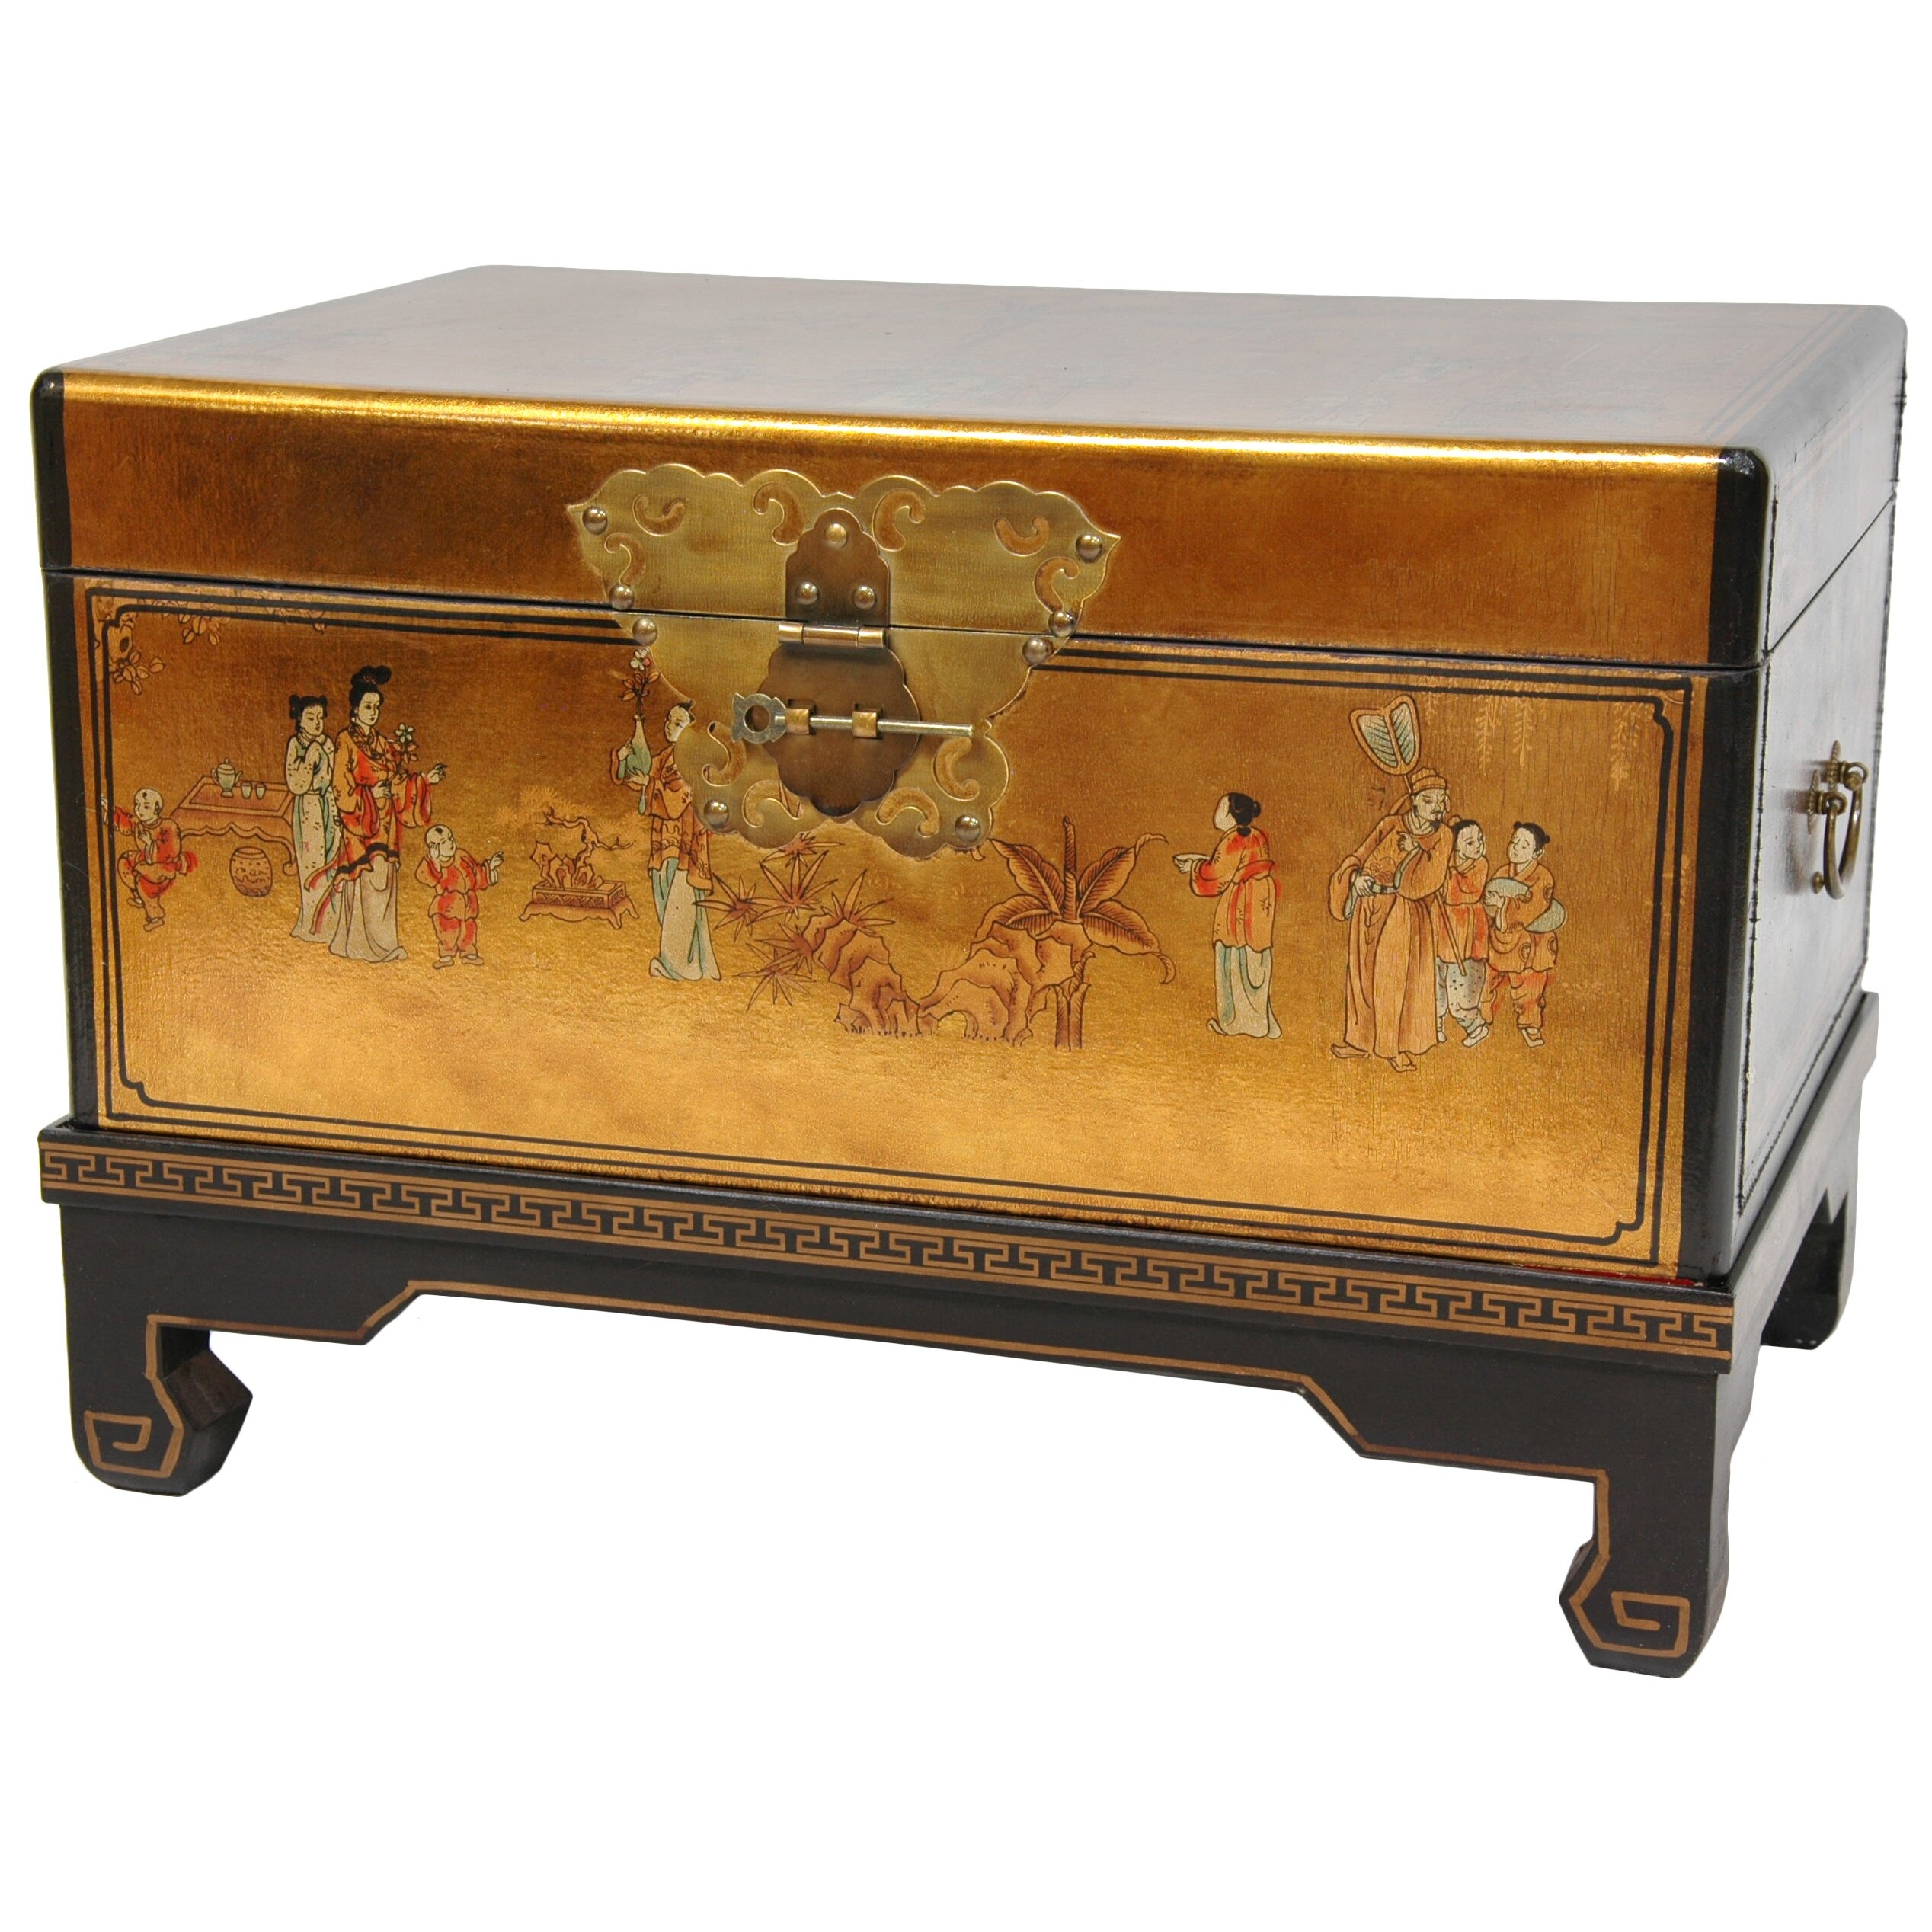 Oriental Furniture Hand Painted Asian Decor 26-Inch Gold Leaf Small Trunk Oriental Hope Chest